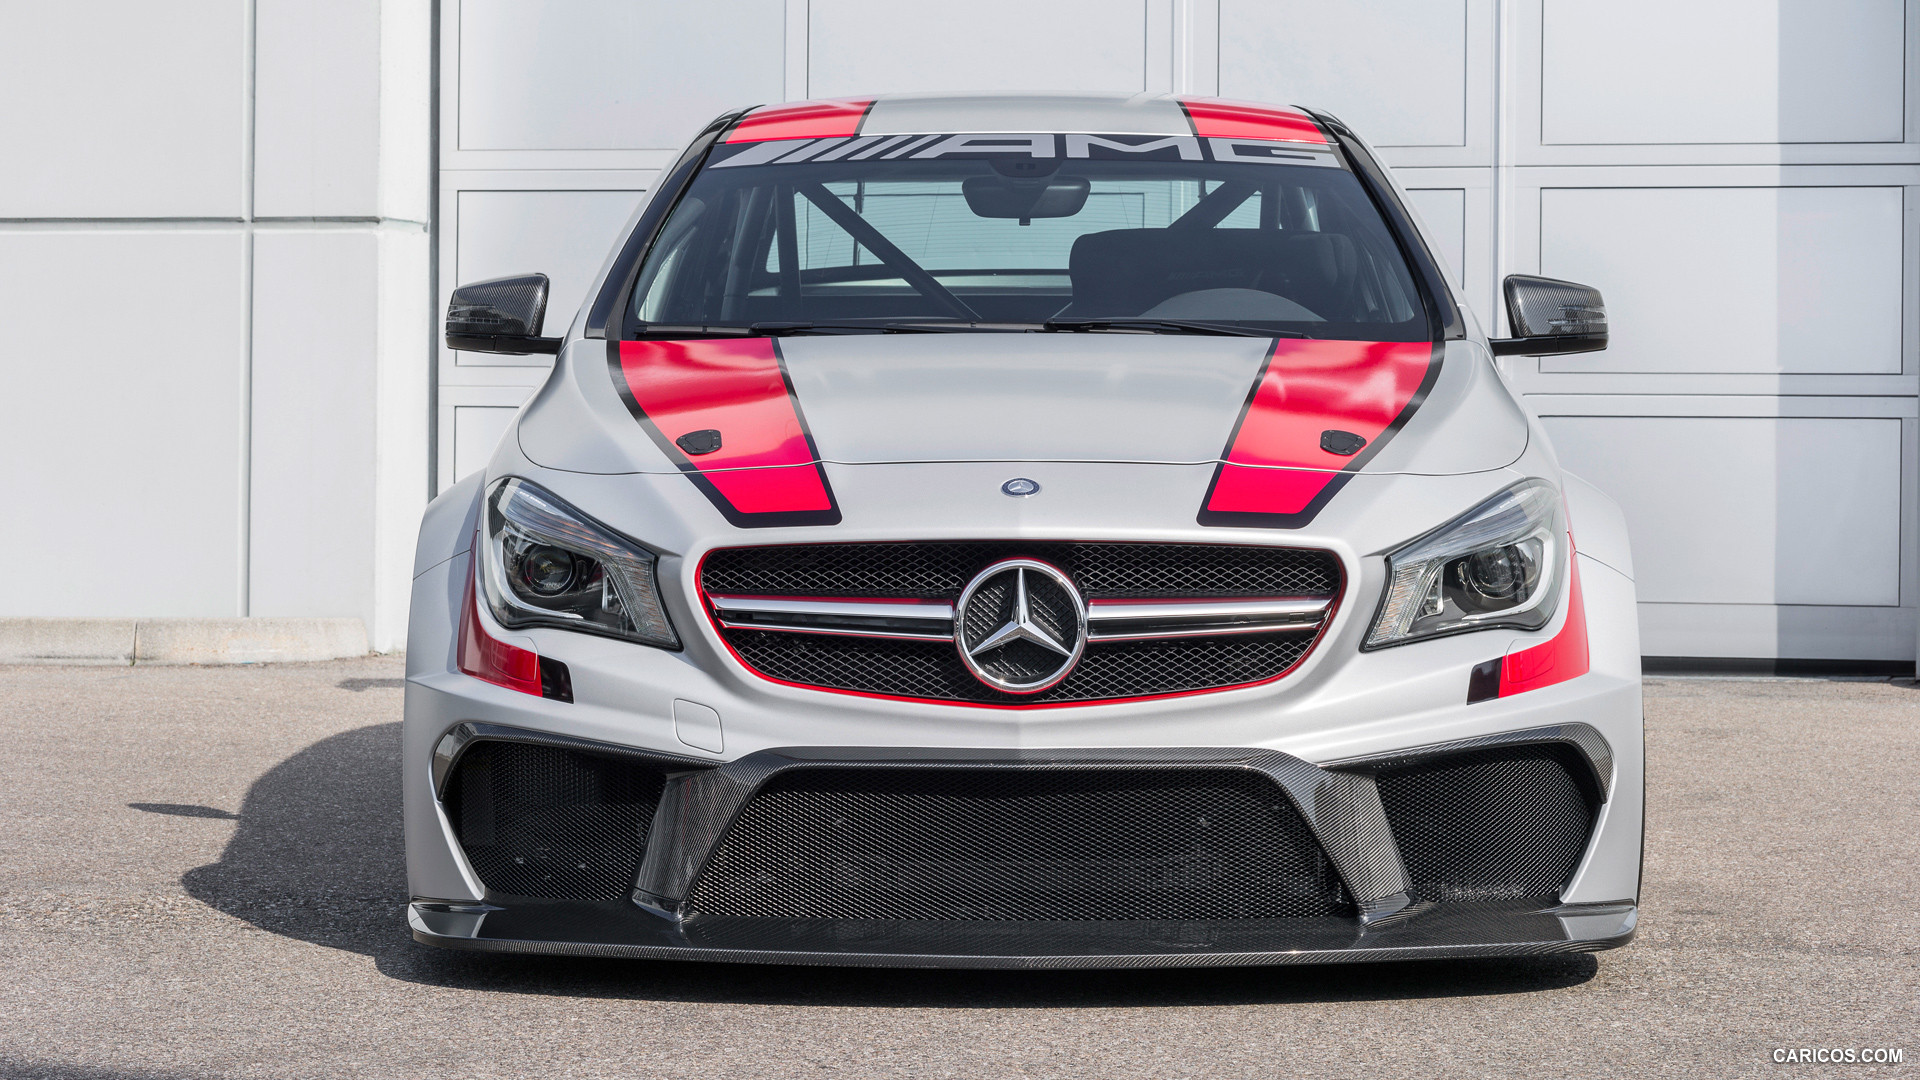 2013 Mercedes-Benz CLA 45 AMG Racing Series Concept  - Front, #5 of 26